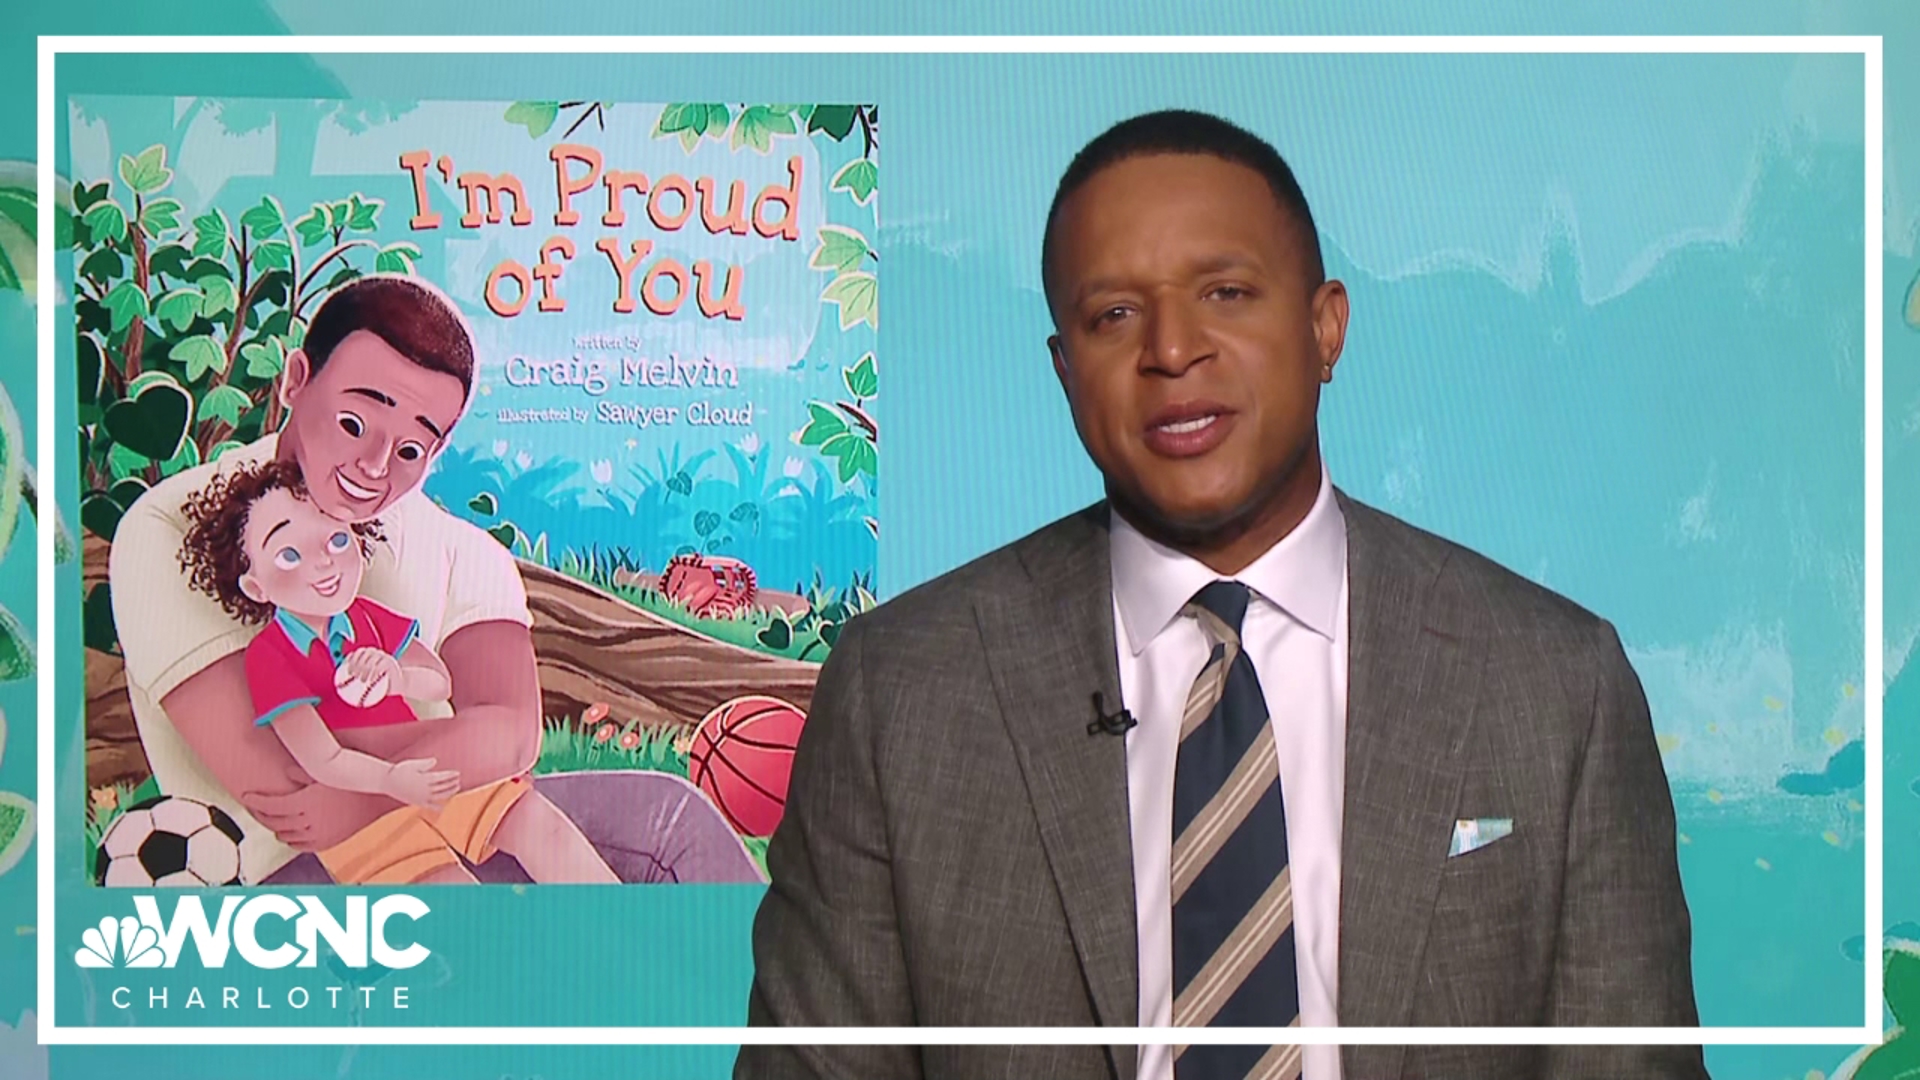 "Today" anchor Craig Melvin joins WCNC Charlotte's Sarah French to discuss his new children's book, "I'm Proud of You."